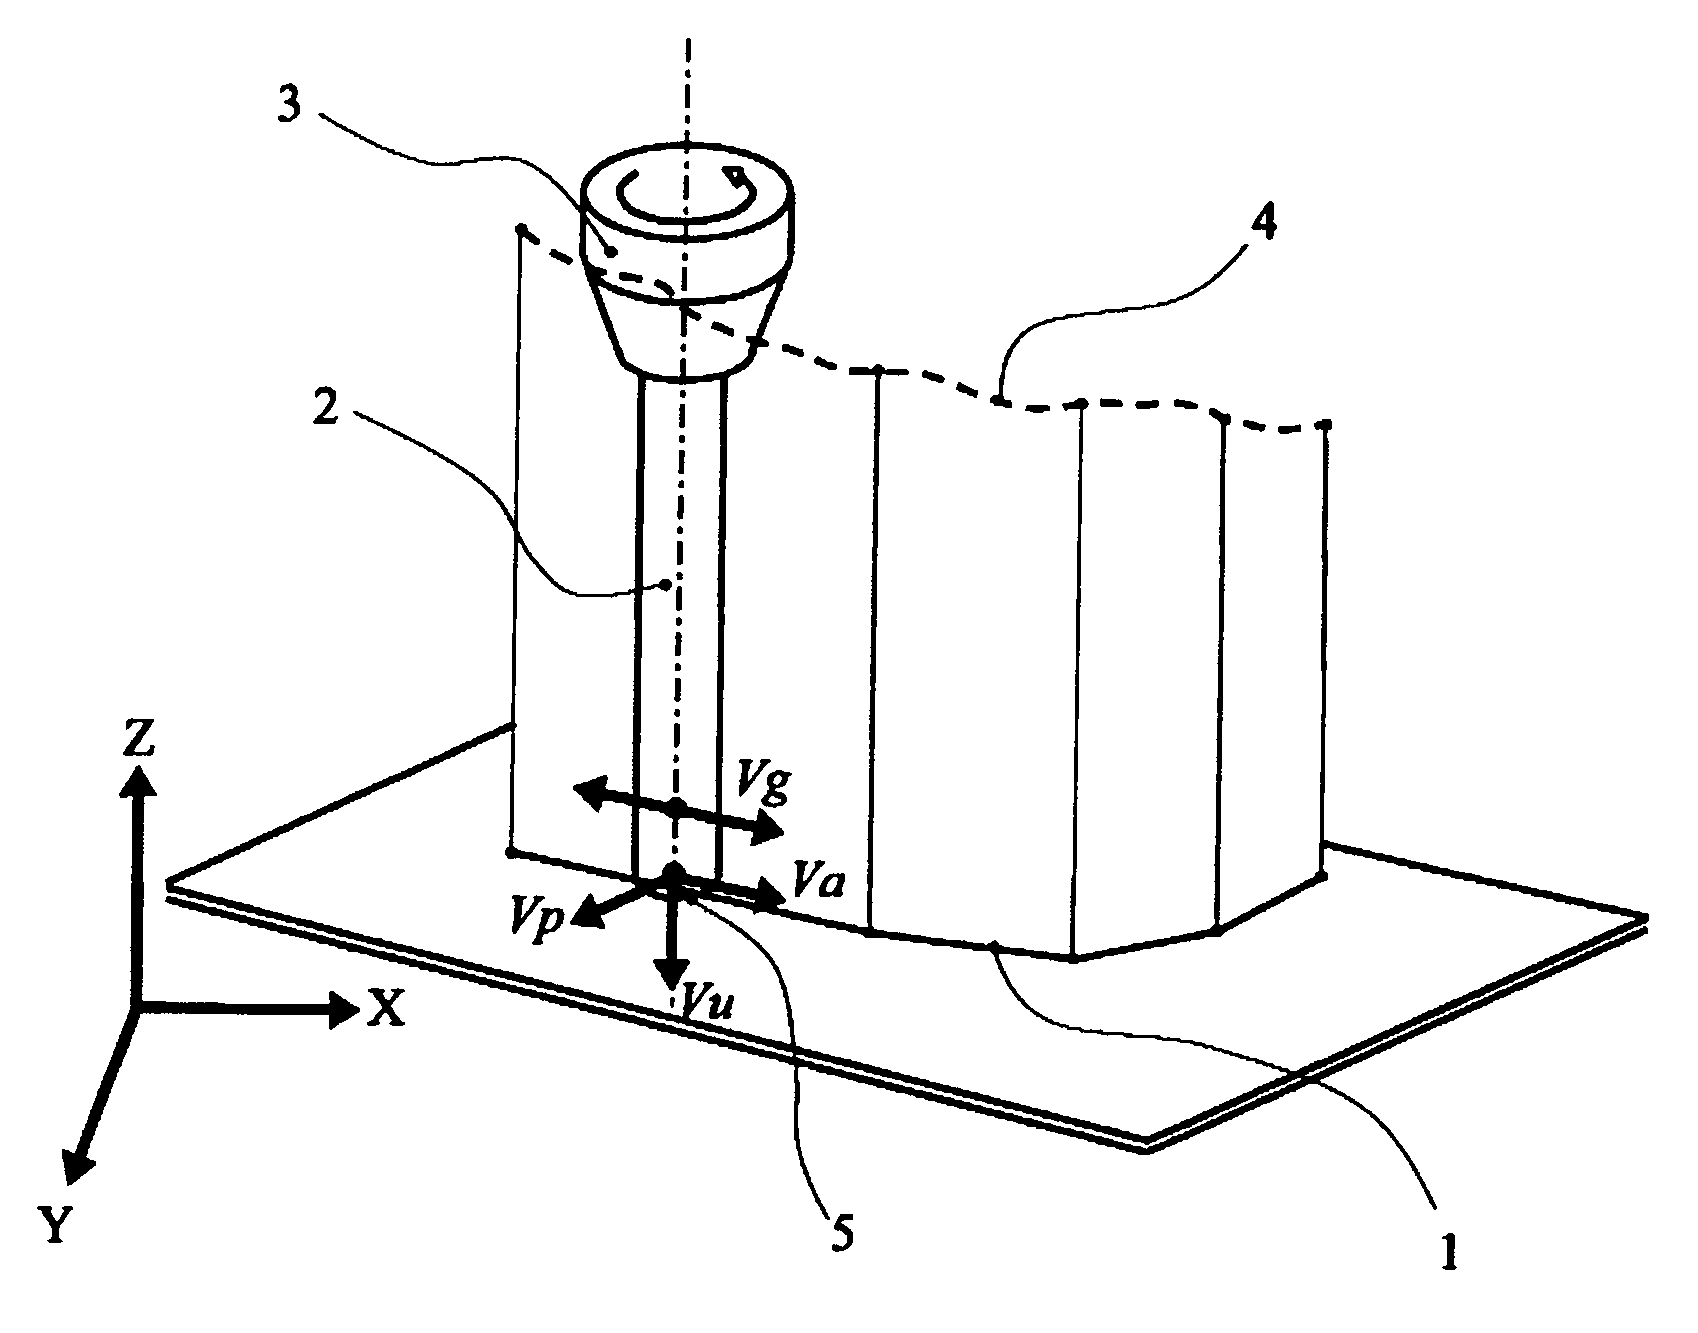 Method and machine for machining parts using spark-erosion milling